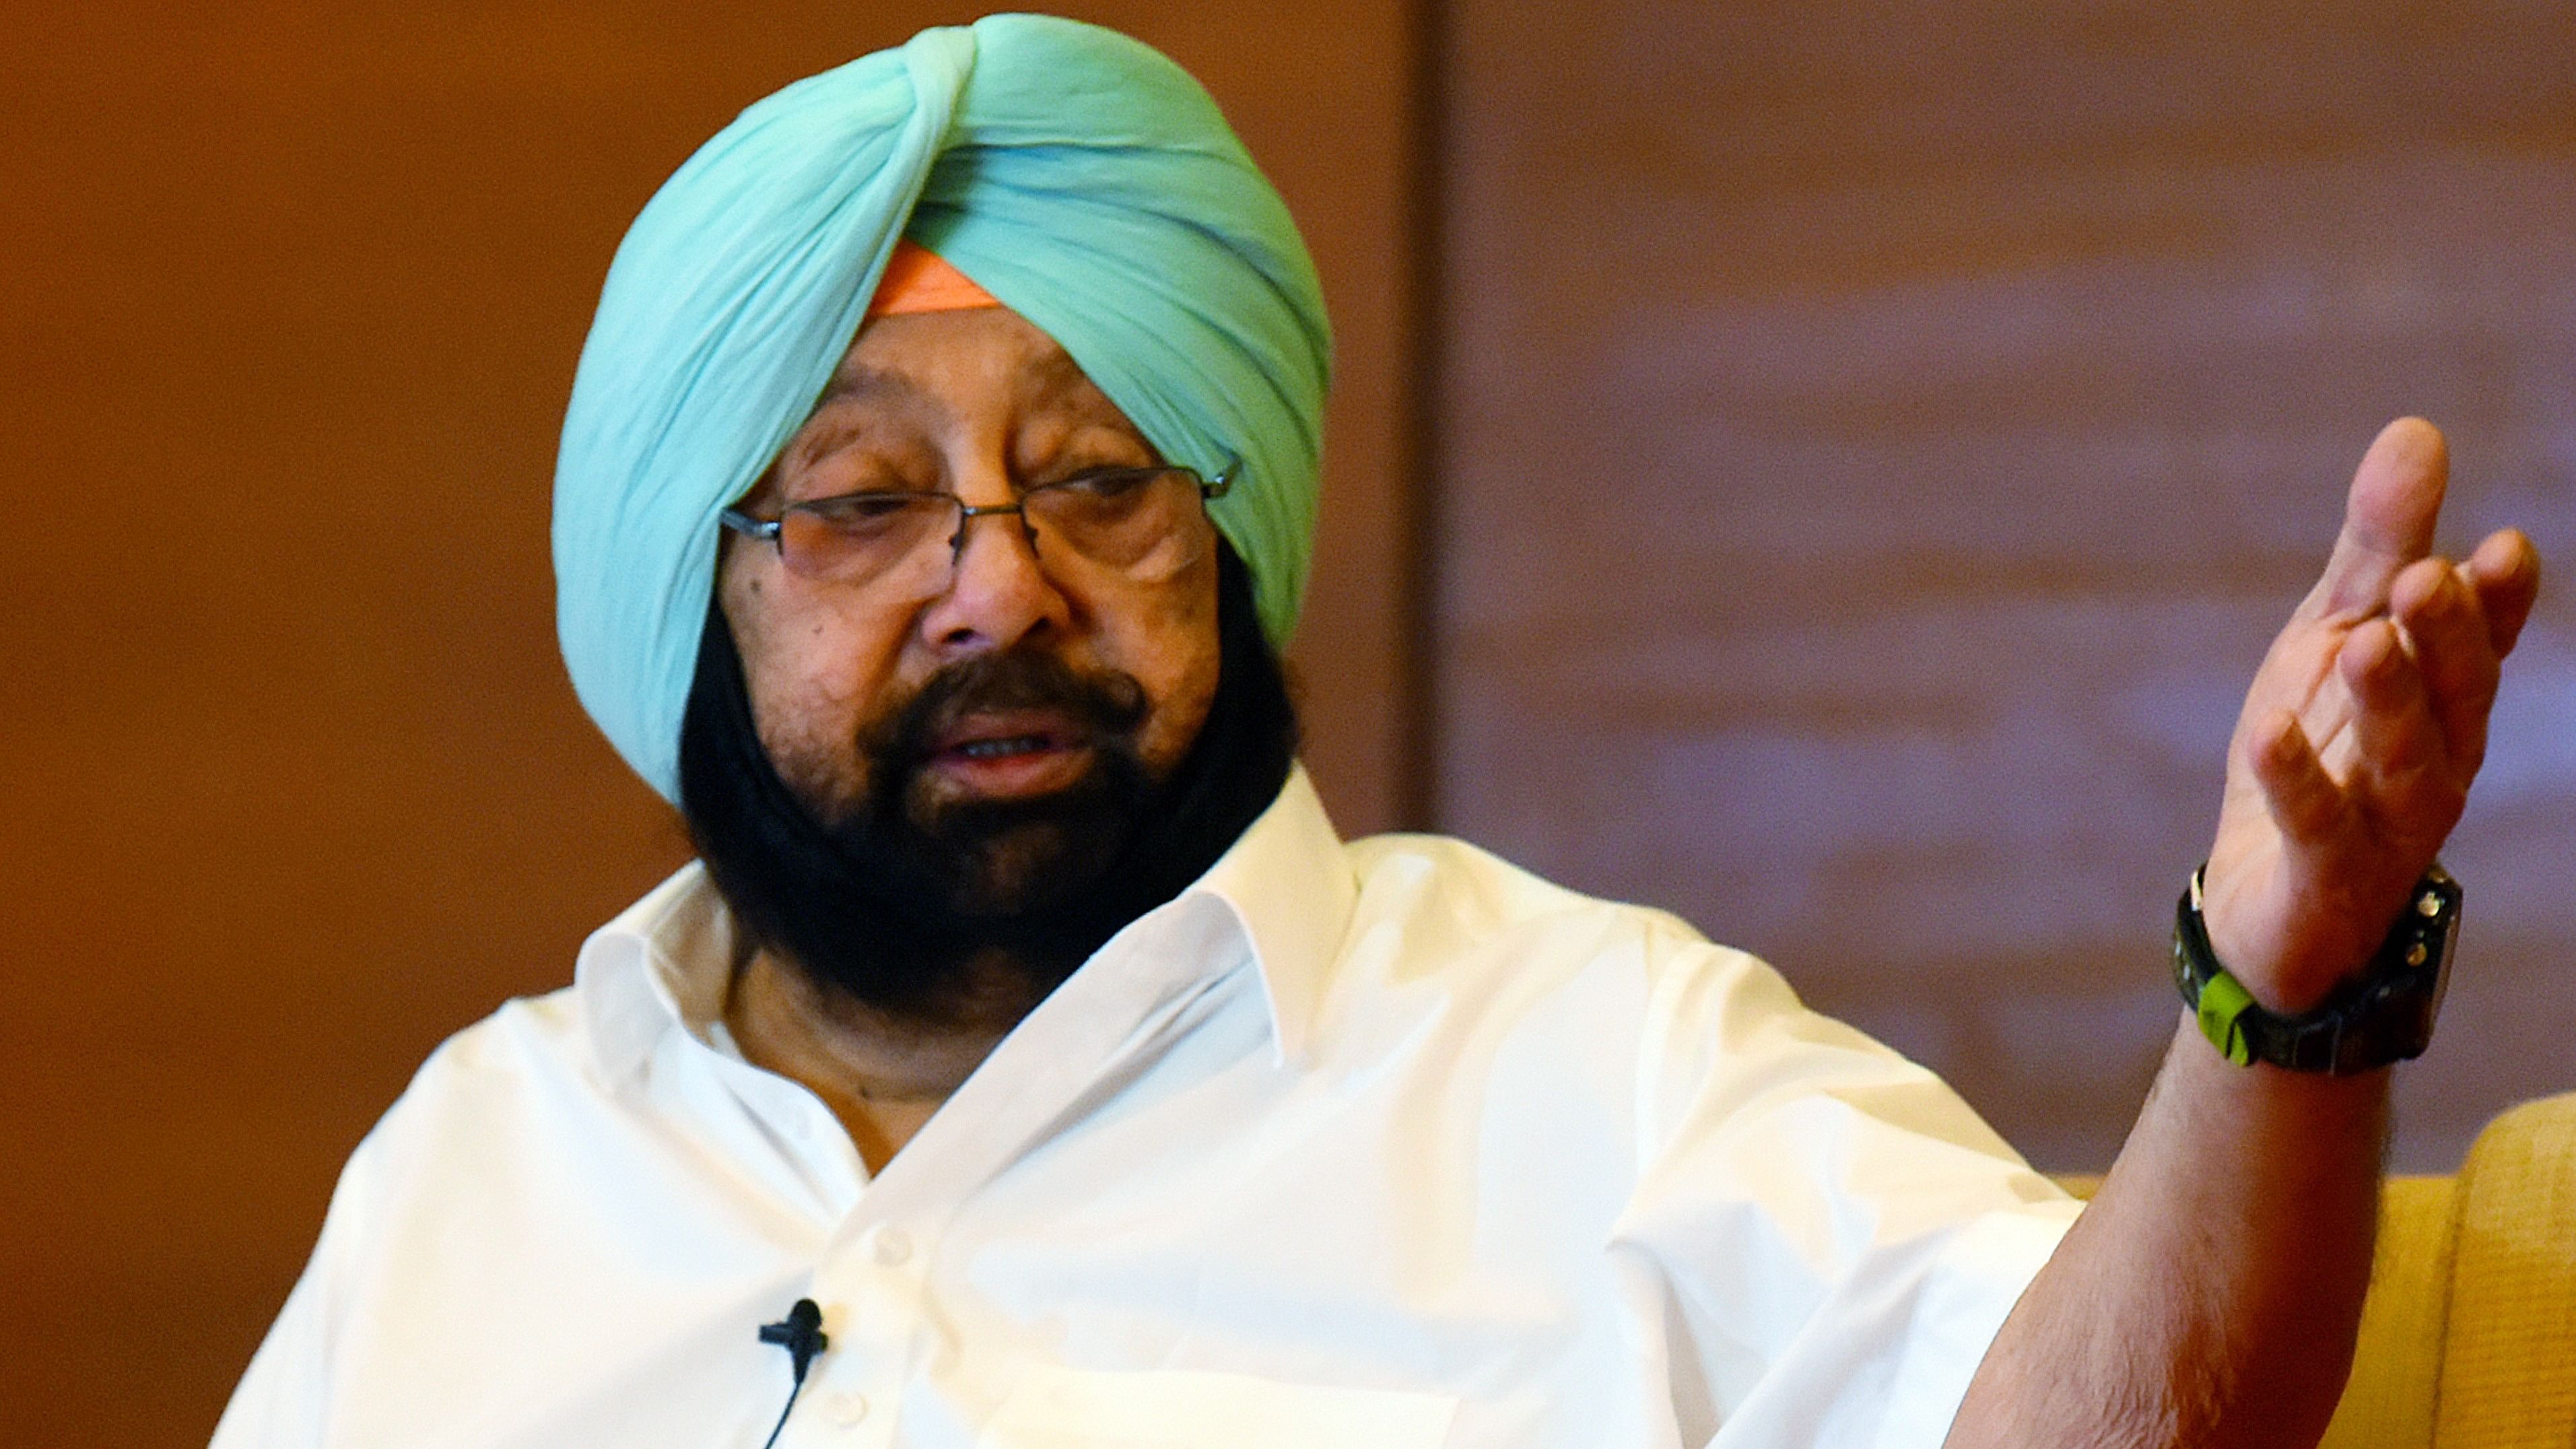 End of the road for Captain Amarinder? Ex-CM headed for shock defeat on home turf Patiala